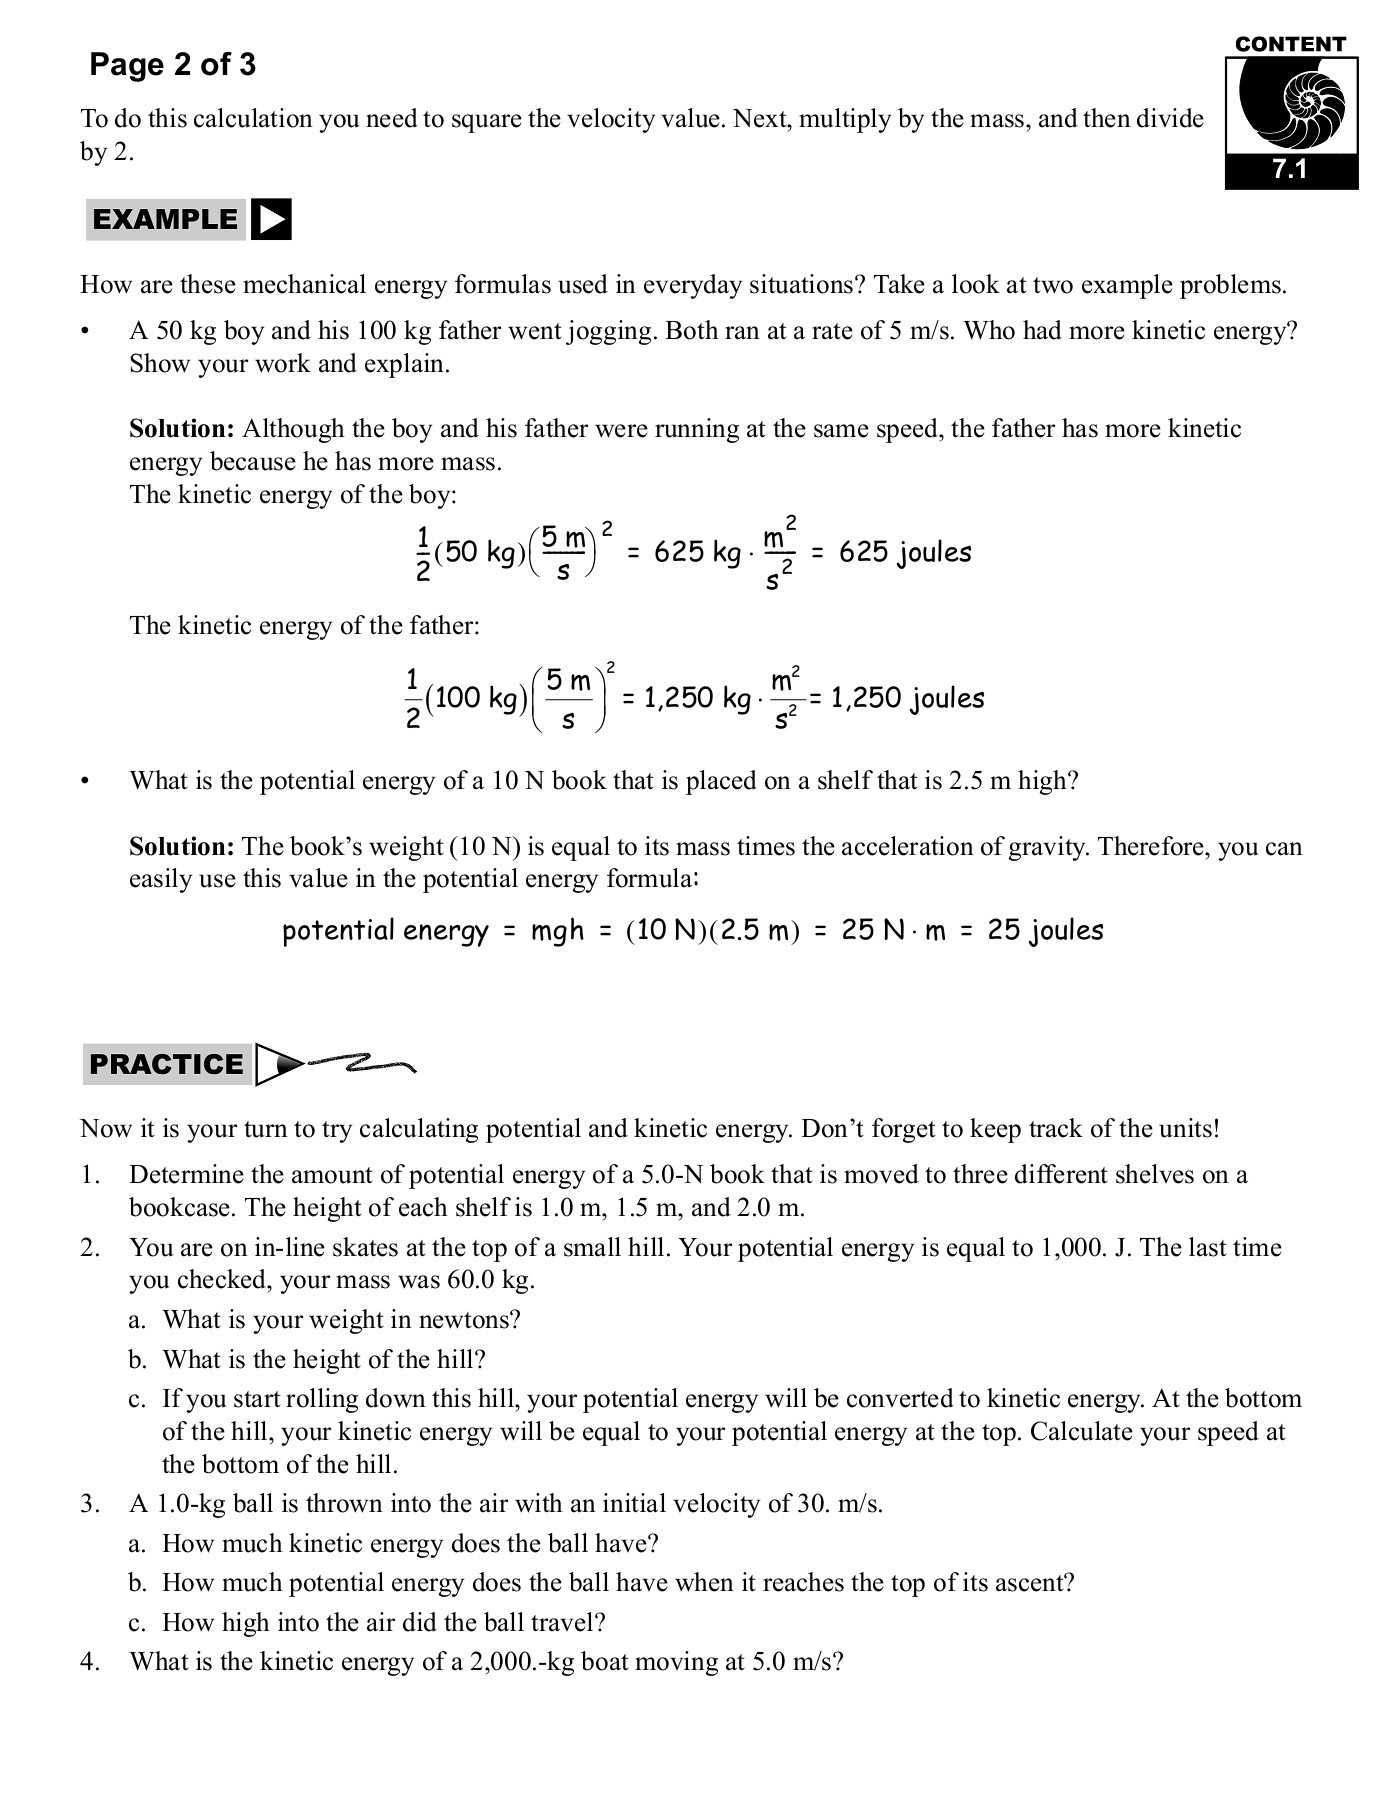 Potential Vs Kinetic Energy Worksheet 7 1 Potential and Kinetic Energy Cpo Science Pages 1 29